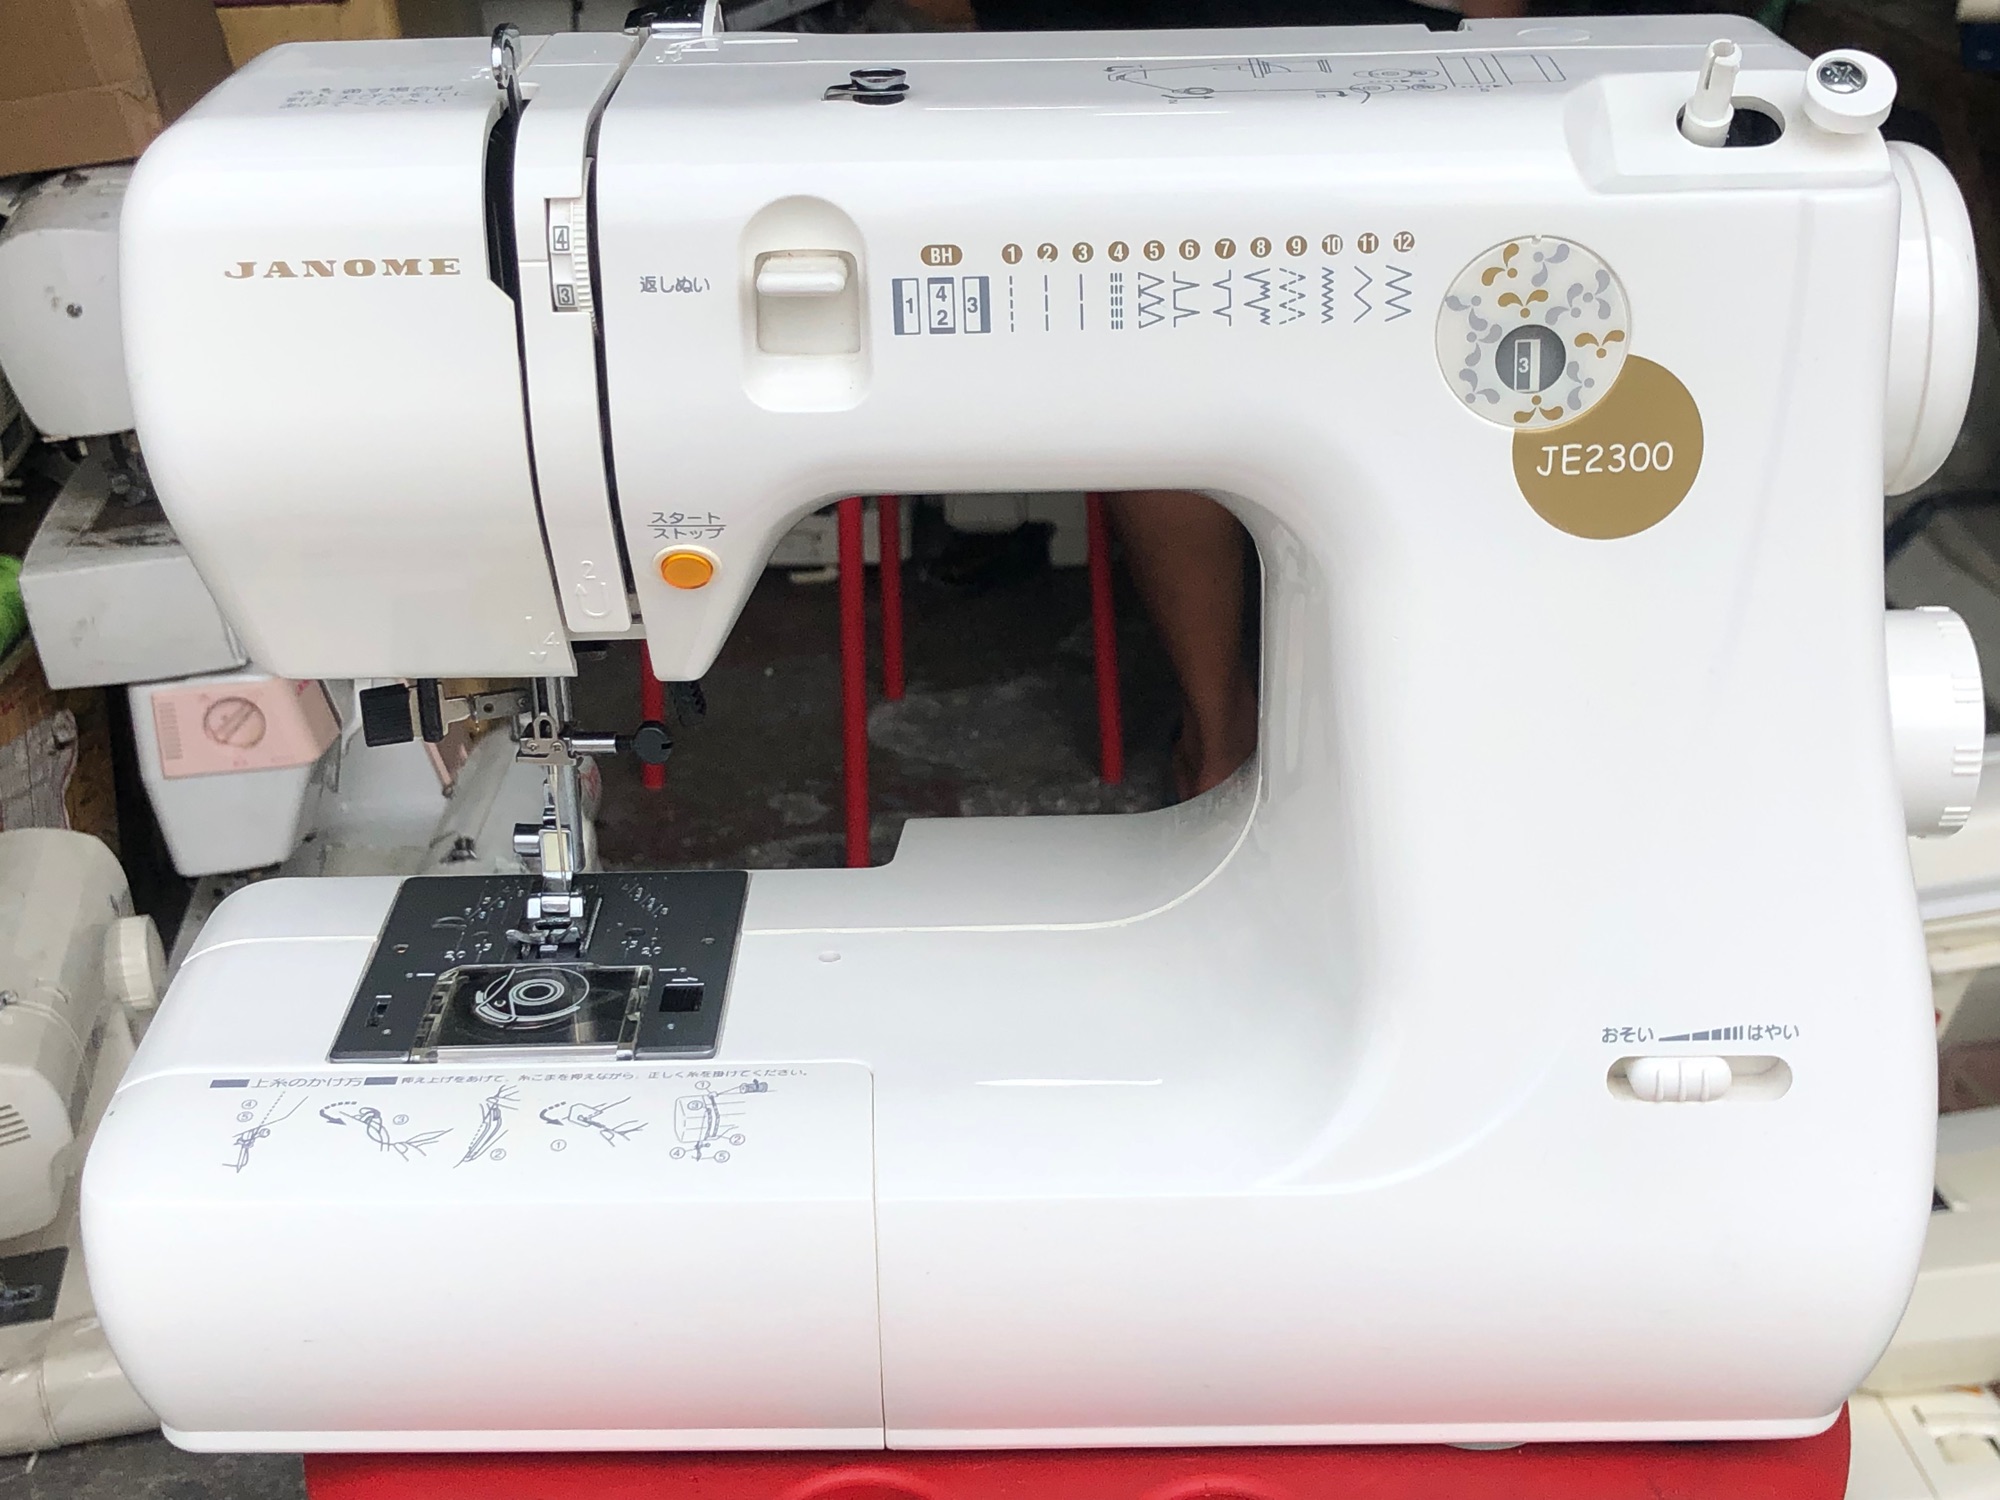 Janome Portable Heavy Duty Sewing Machine: Easy Operation, Durable